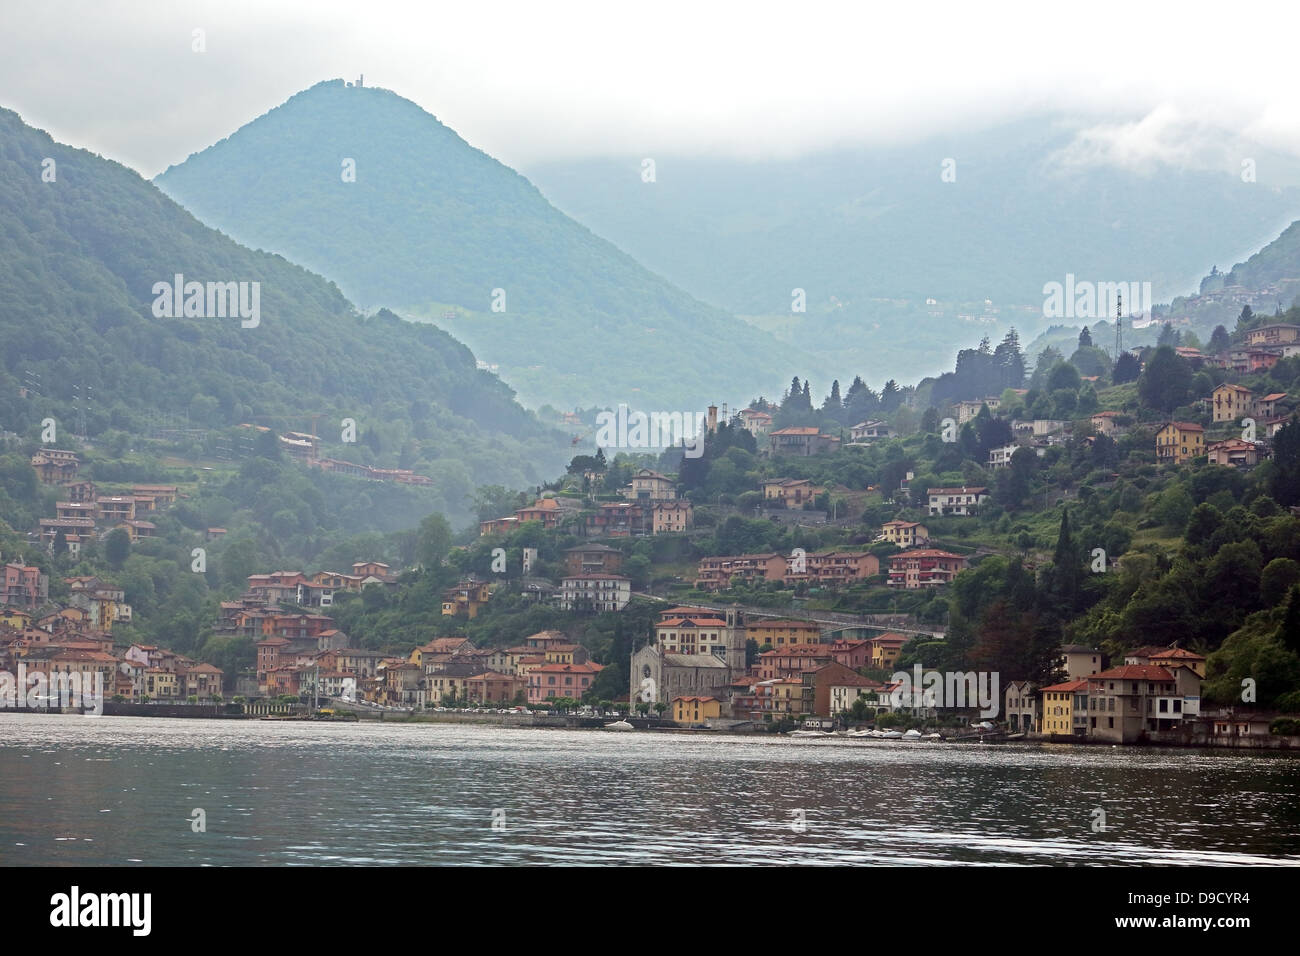 Mountains soar above villages along the shores of Lake Como in Northern Italy Stock Photo